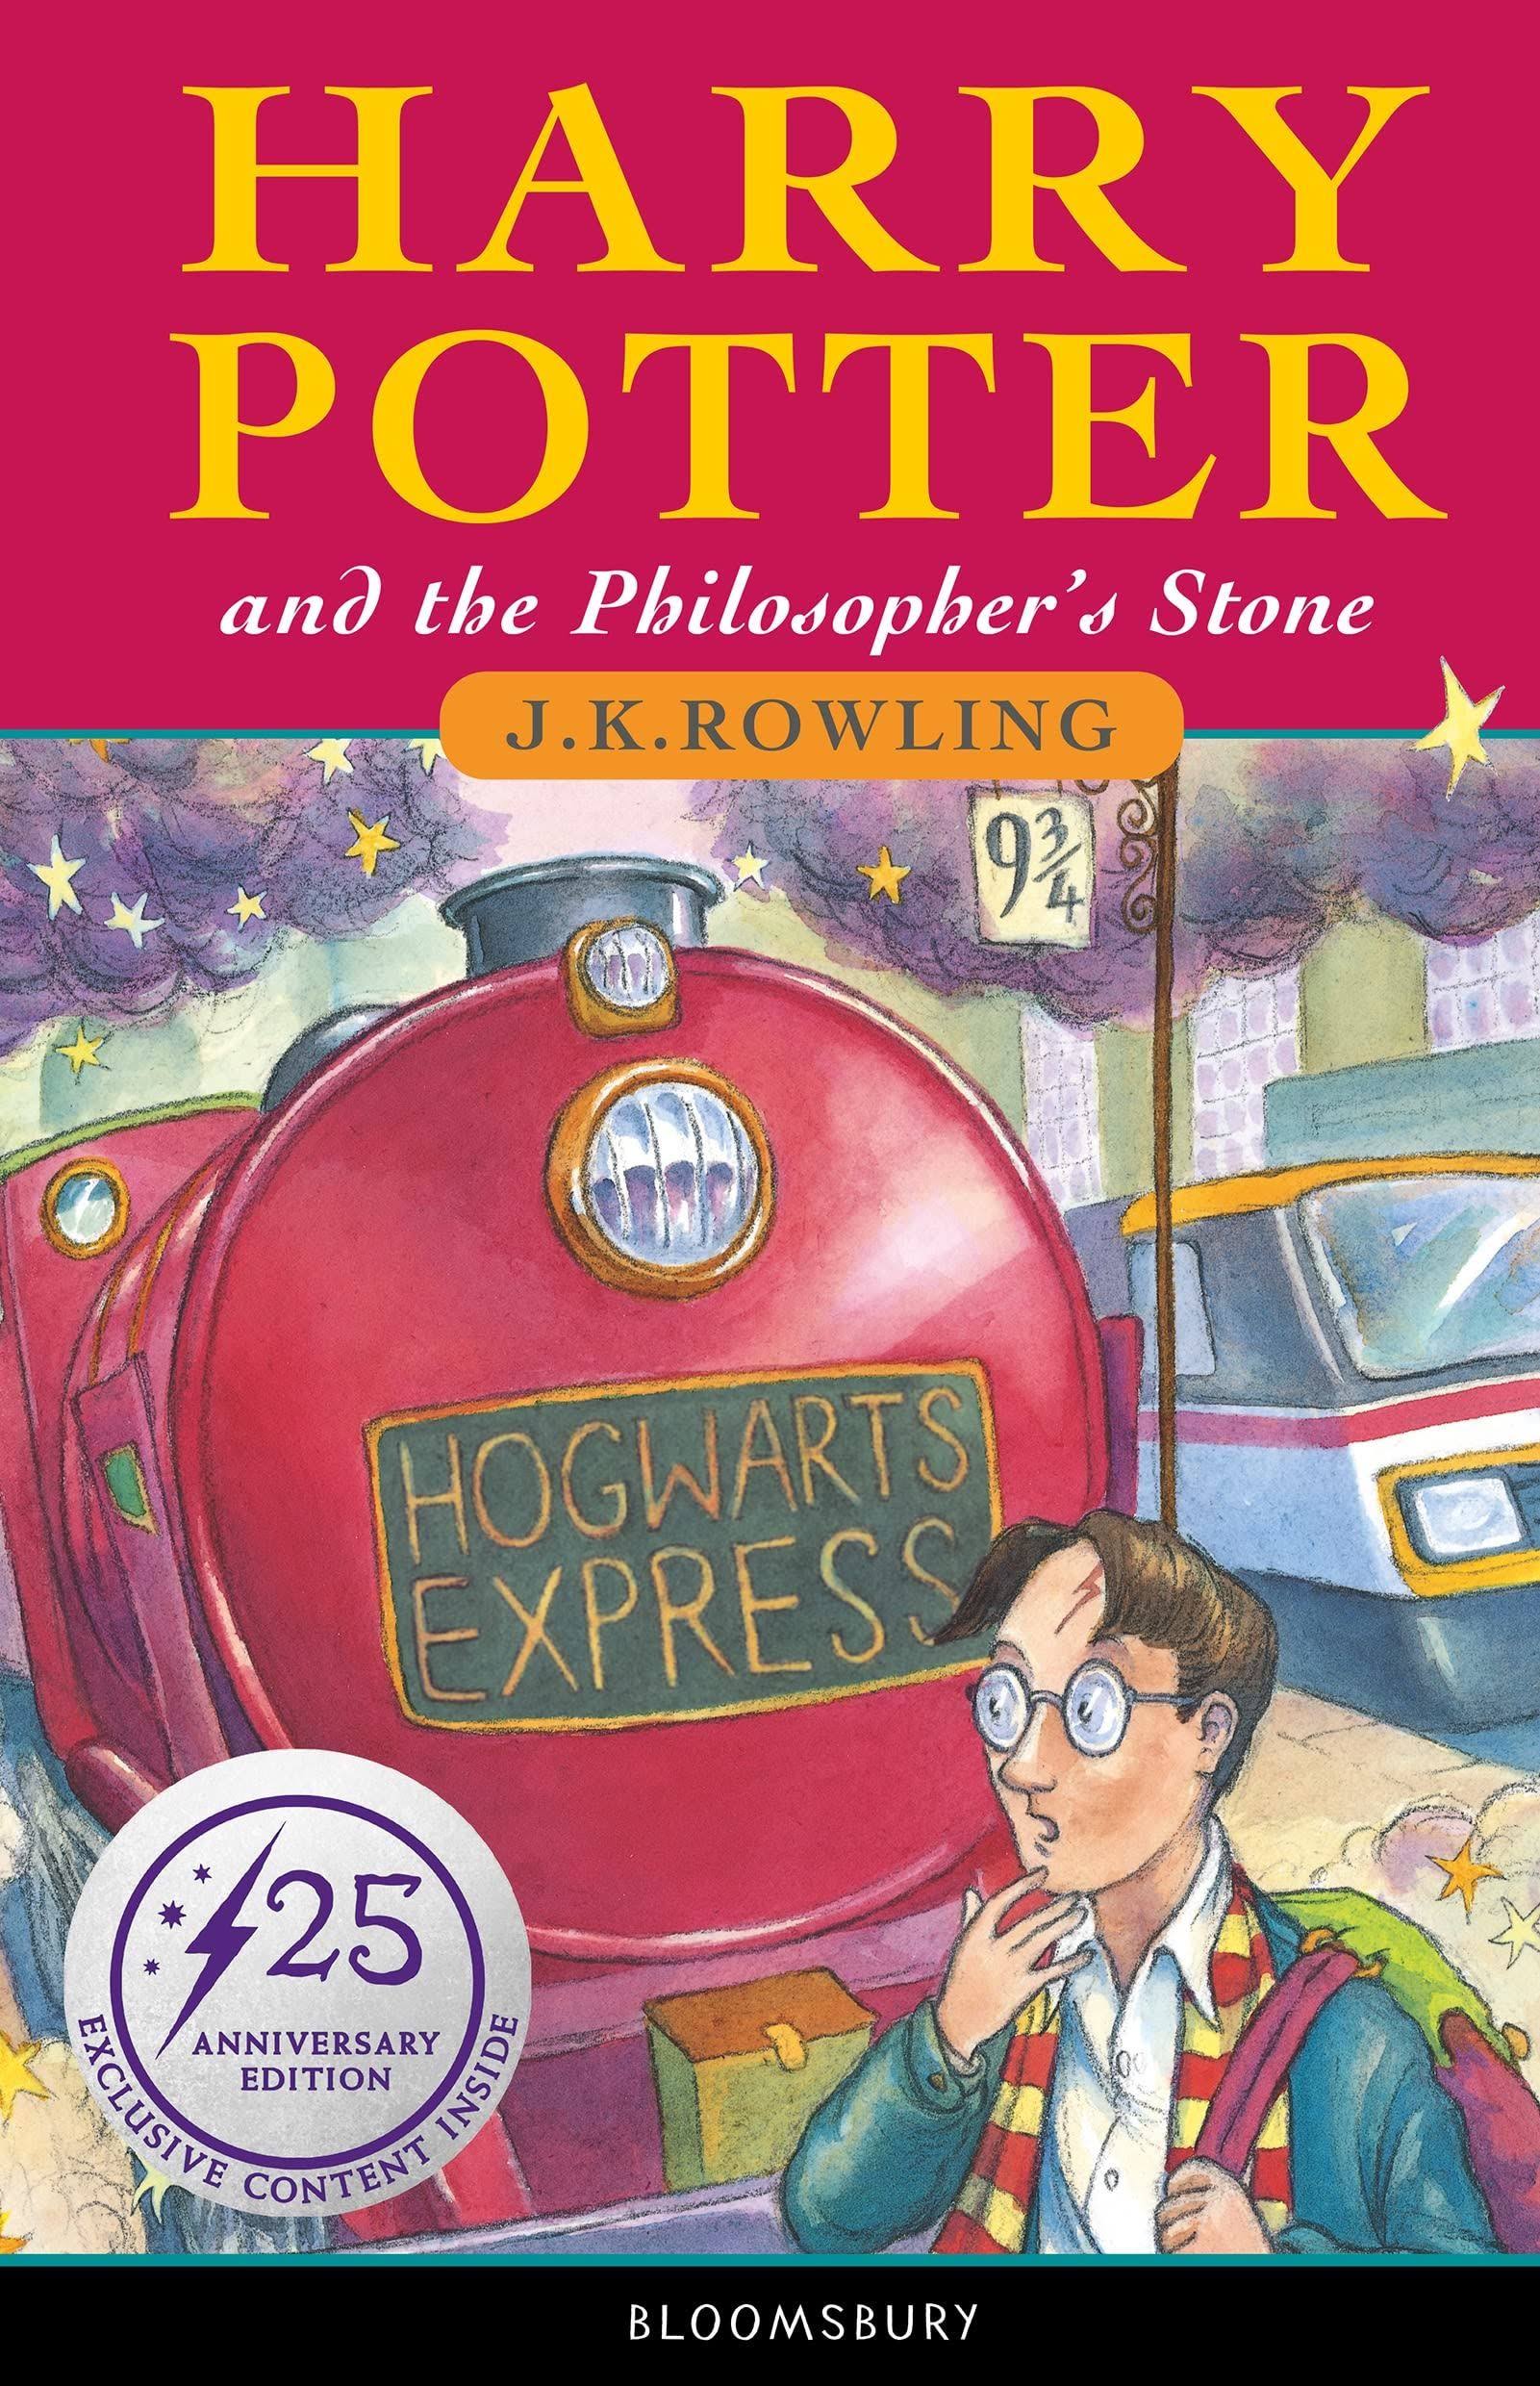 Harry Potter and The Philosopher's Stone - 25th Anniversary Edition by J.K. Rowling